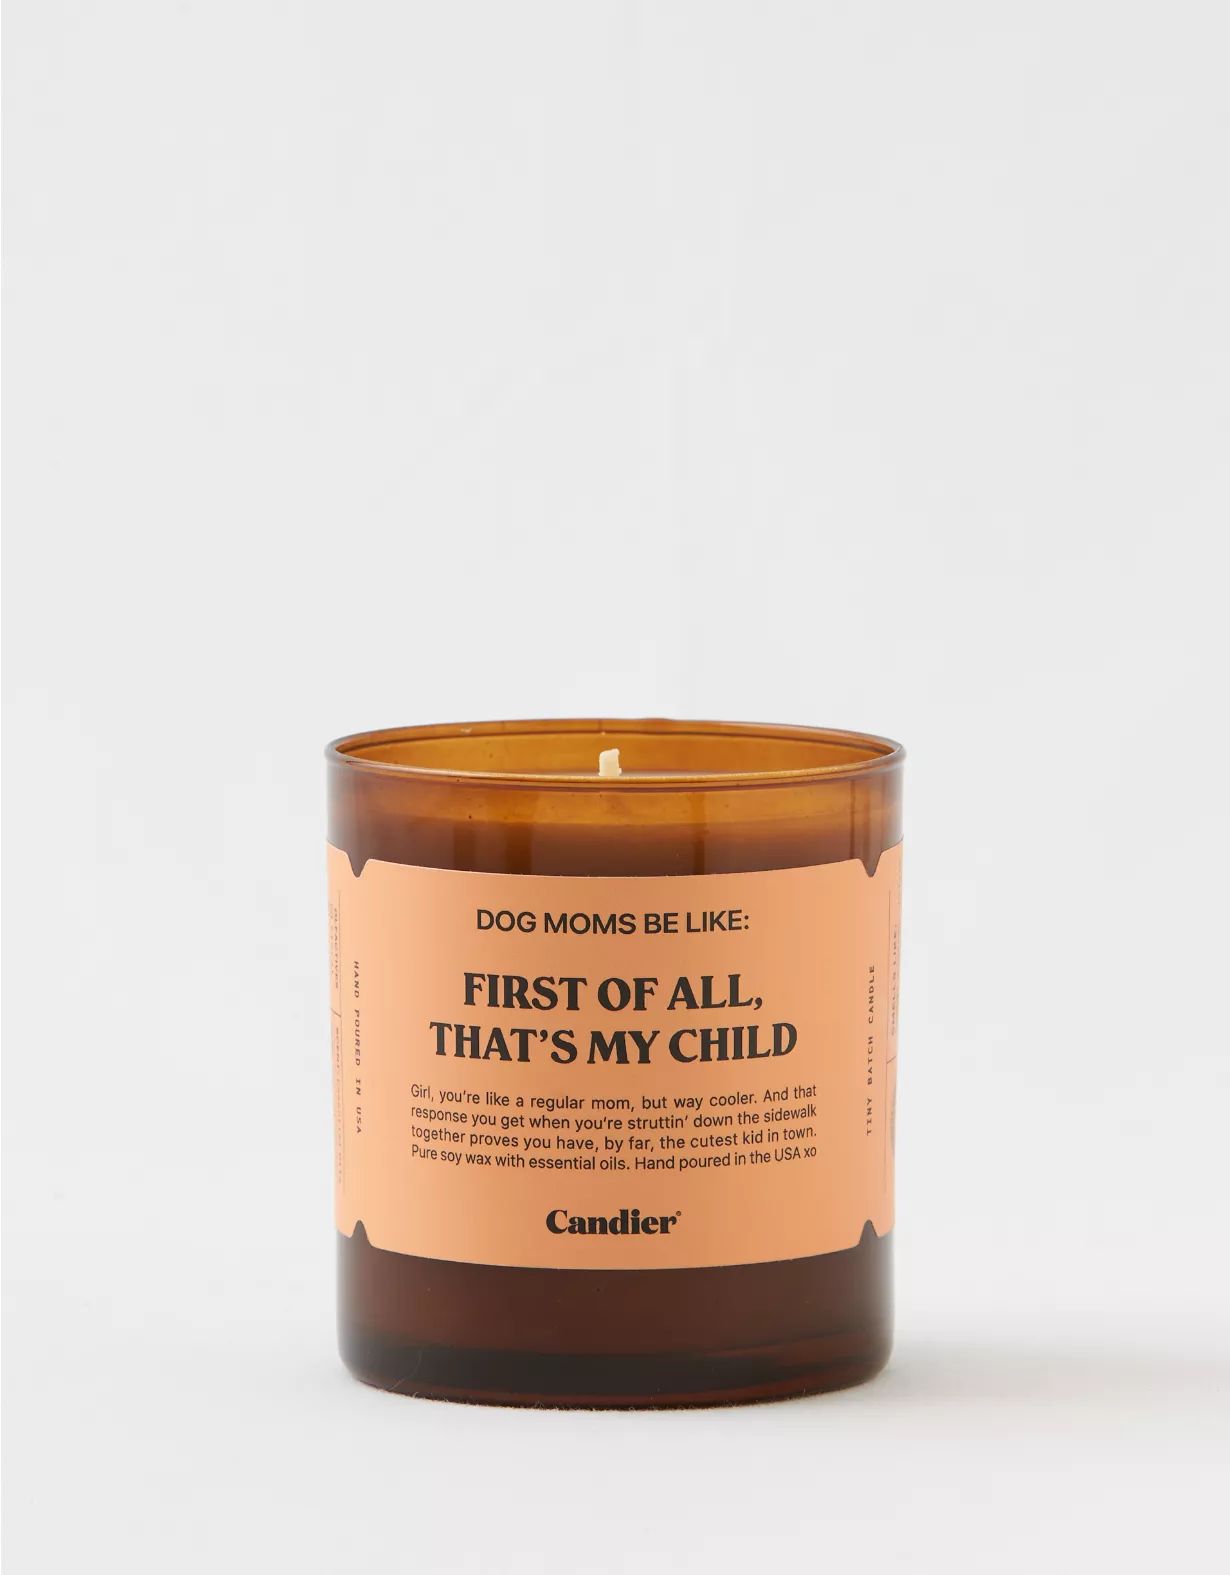 Candier Dog Mom Candle | Aerie